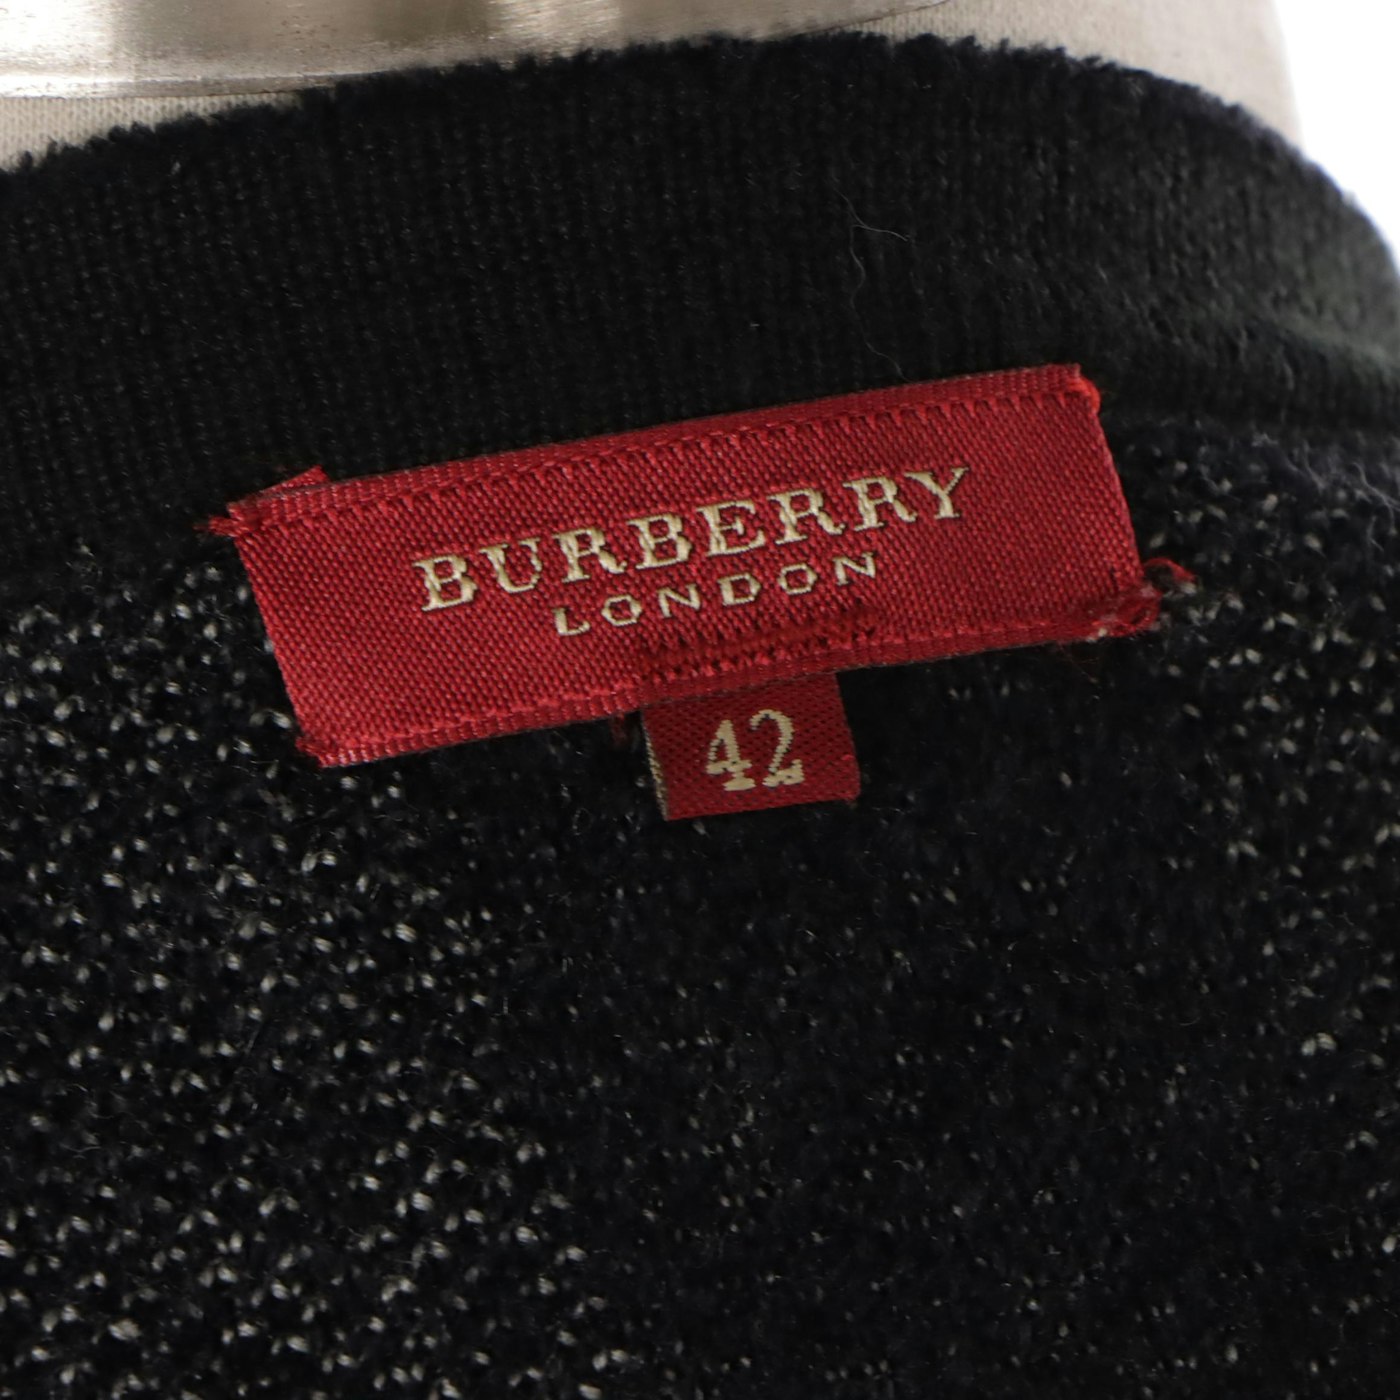 Burberry Red Label Cardigan Sweater in Black and Grey Checked Wool and ...